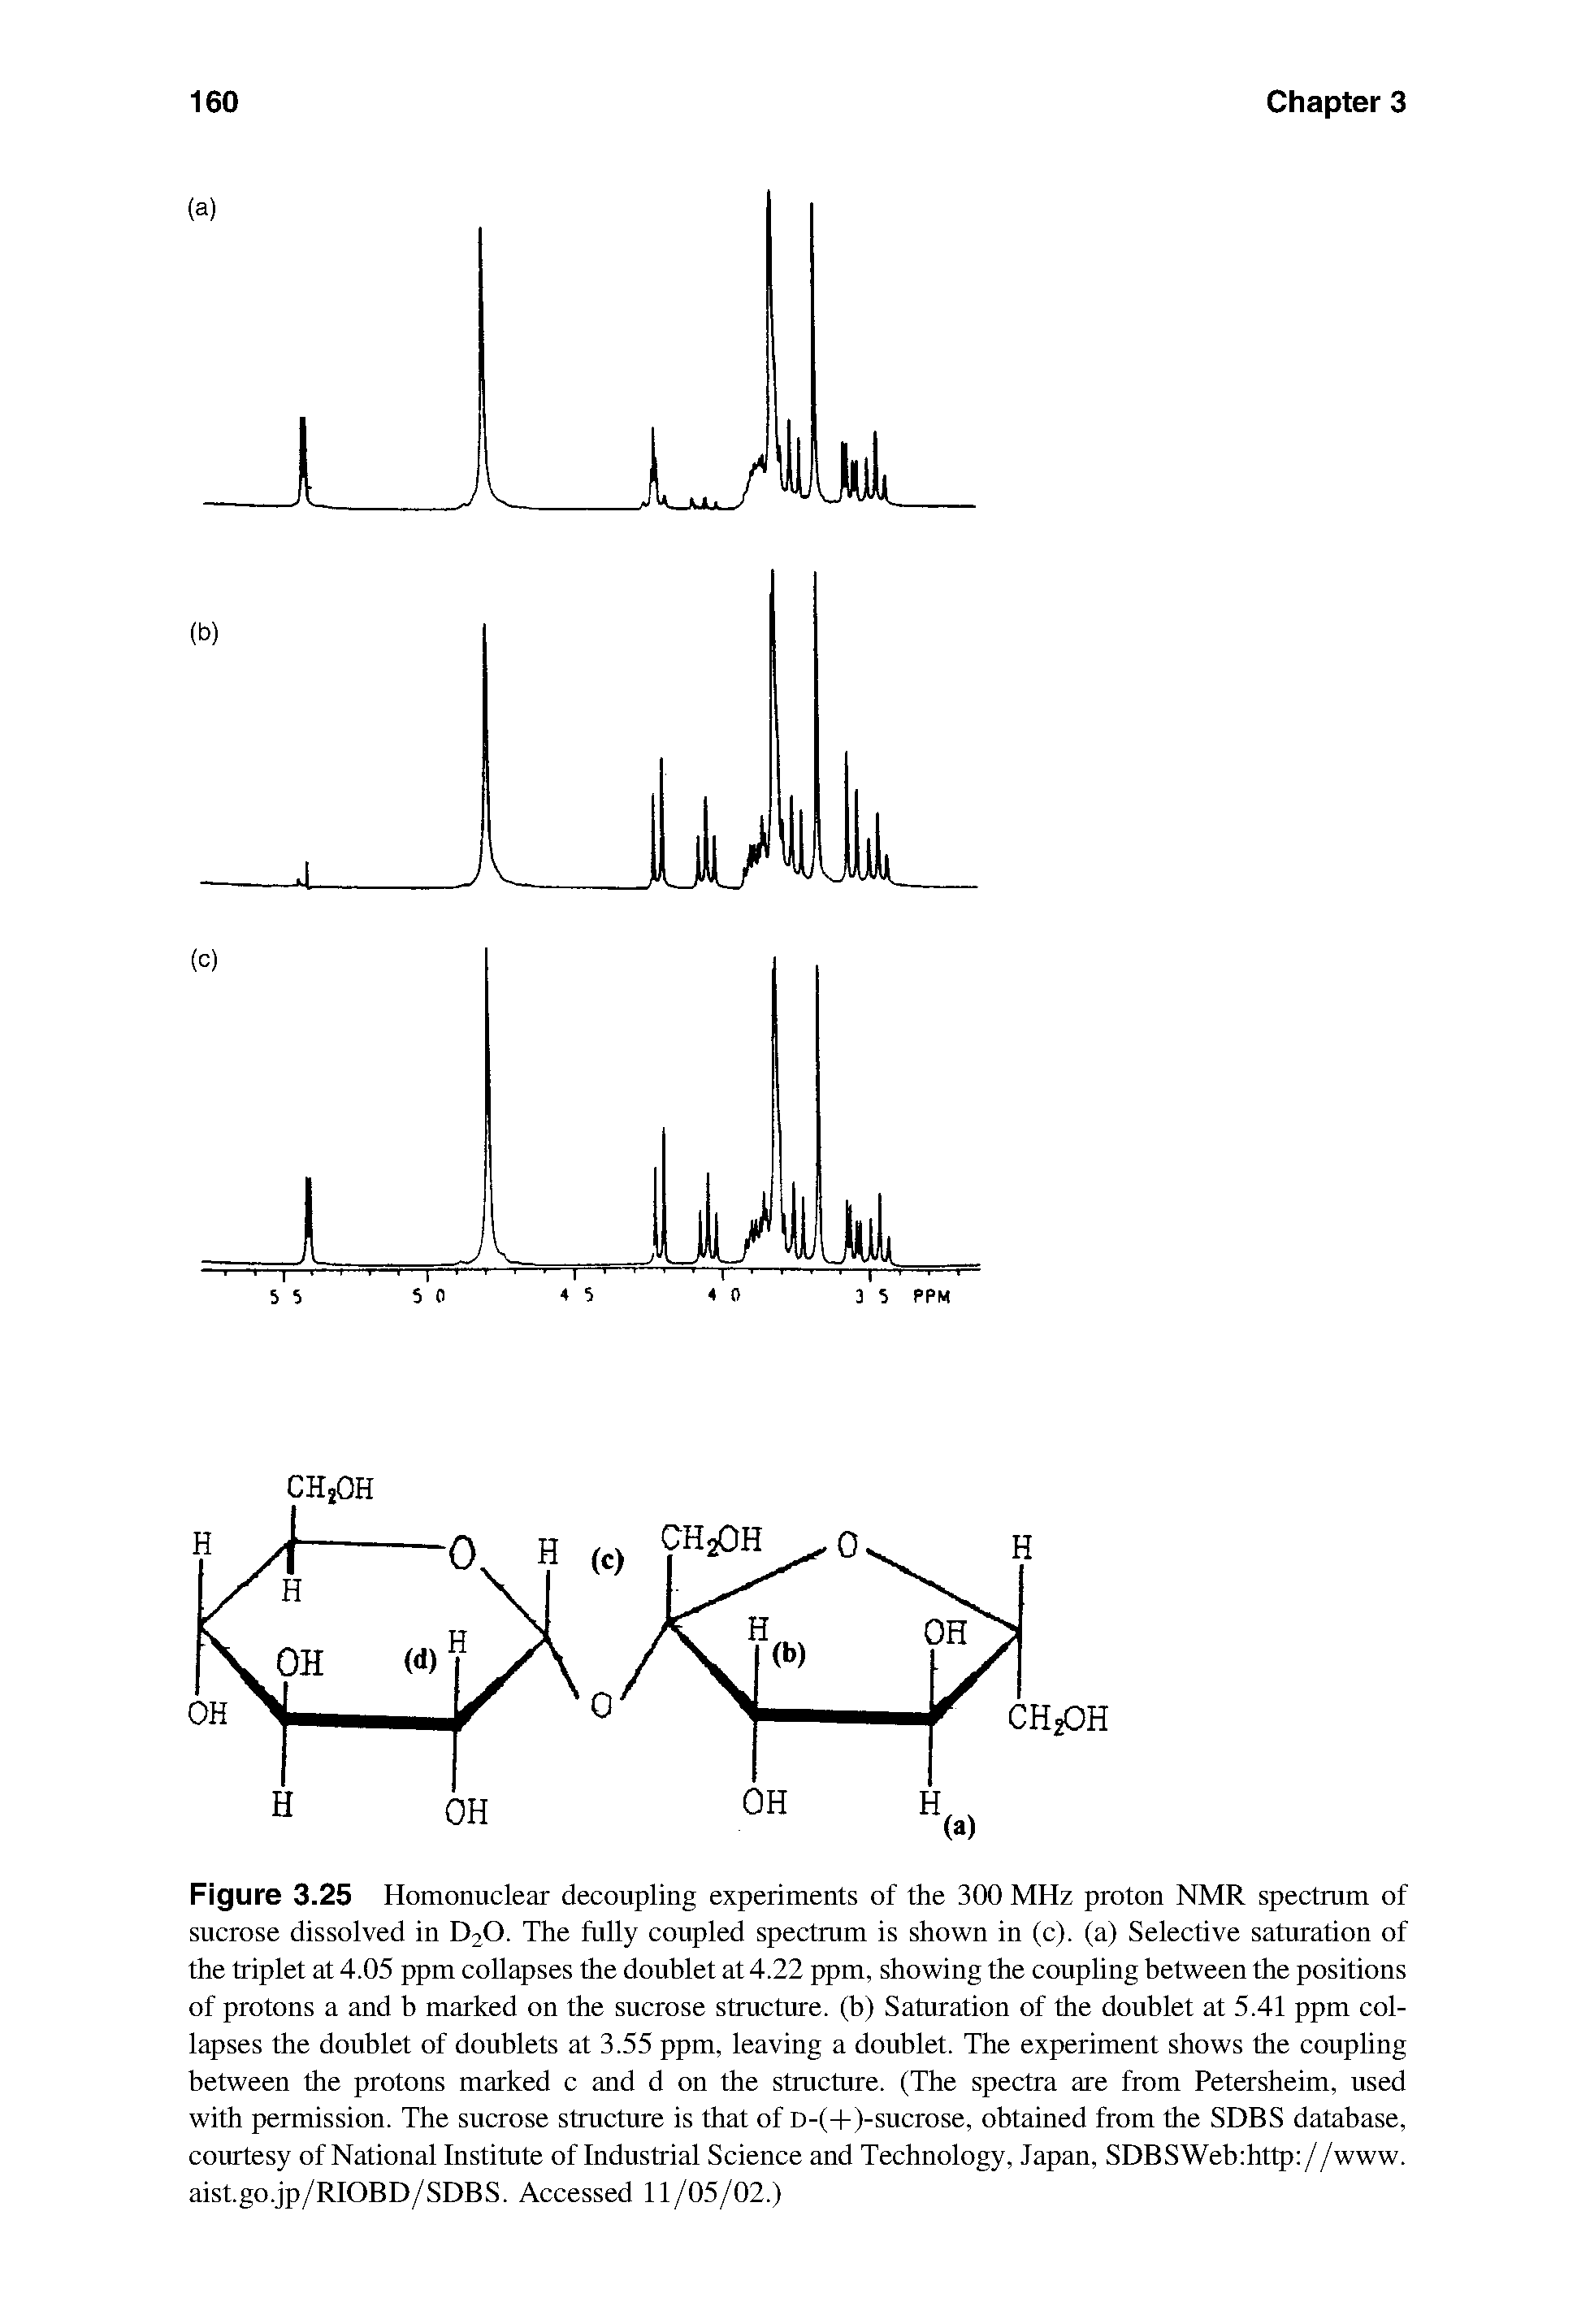 Figure 3.25 Homonuclear decoupling experiments of the 300 MHz proton NMR spectrum of sucrose dissolved in D2O. The fully coupled spectrum is shown in (c). (a) Selective saturation of the triplet at 4.05 ppm collapses the doublet at 4.22 ppm, showing the coupling between the positions of protons a and b marked on the sucrose structure, (b) Saturation of the doublet at 5.41 ppm collapses the doublet of doublets at 3.55 ppm, leaving a doublet. The experiment shows the coupling between the protons marked c and d on the structure. (The spectra are from Petersheim, used with permission. The sucrose structure is that of D-(- -)-sucrose, obtained from the SDBS database, courtesy of National Institute of Industrial Science and Technology, Japan, SDBSWeb http //www. aist.go.jp/RIOBD/SDBS. Accessed 11/05/02.)...